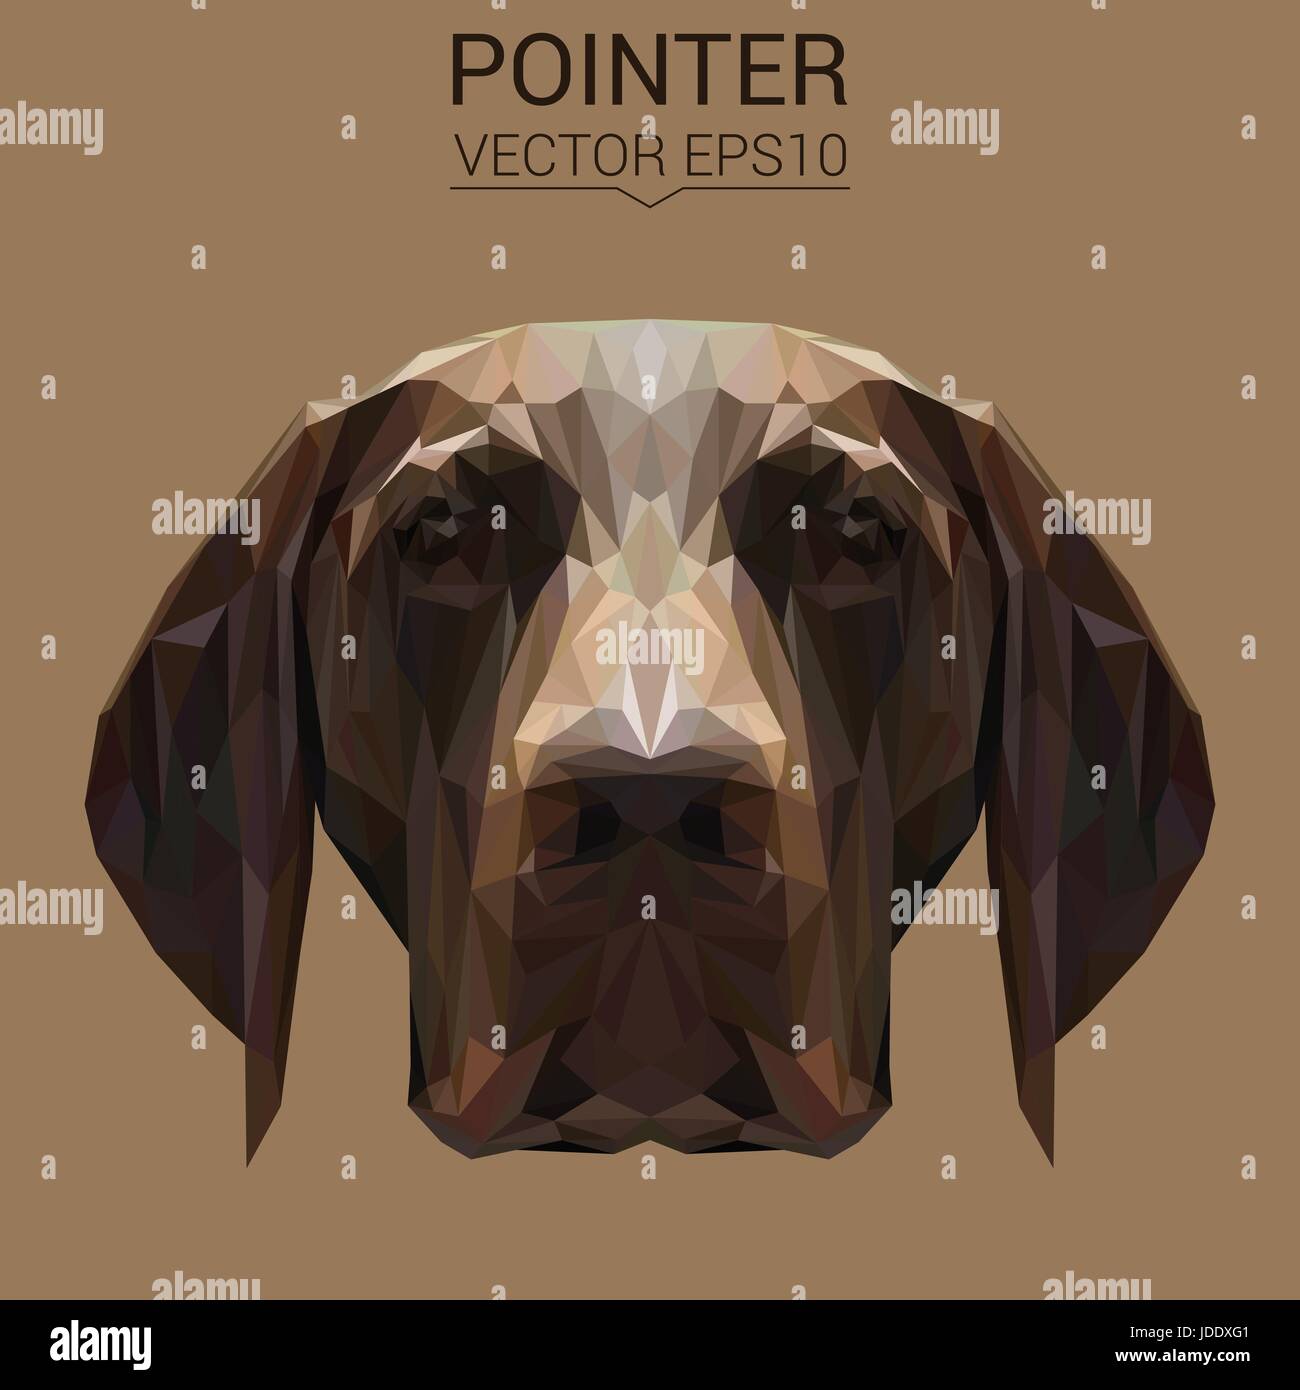 English Pointer Dog animal low poly design. Triangle vector illustration. Stock Vector